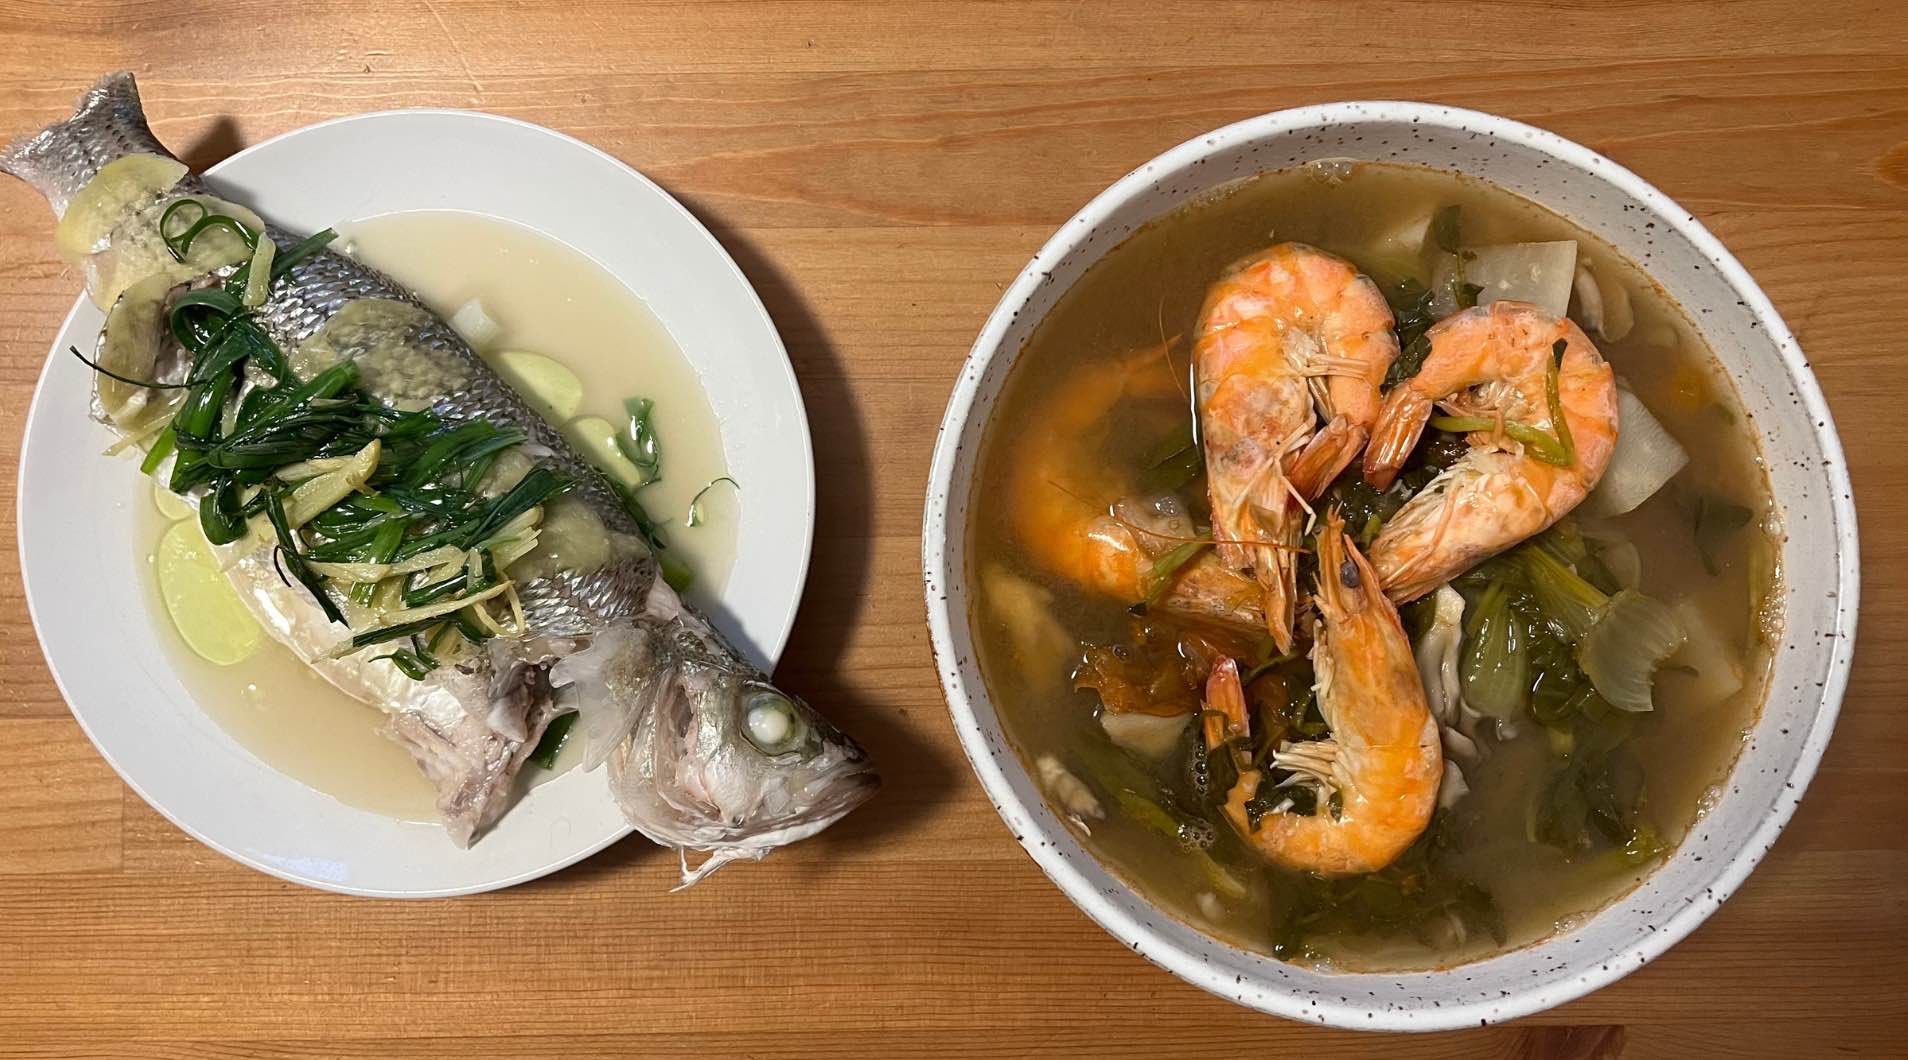 Two dishes of food, side by side. The plate on the left has a steamed fish with wilted scallions on top. The bowl on the right has soup with shrimp and vegetables.